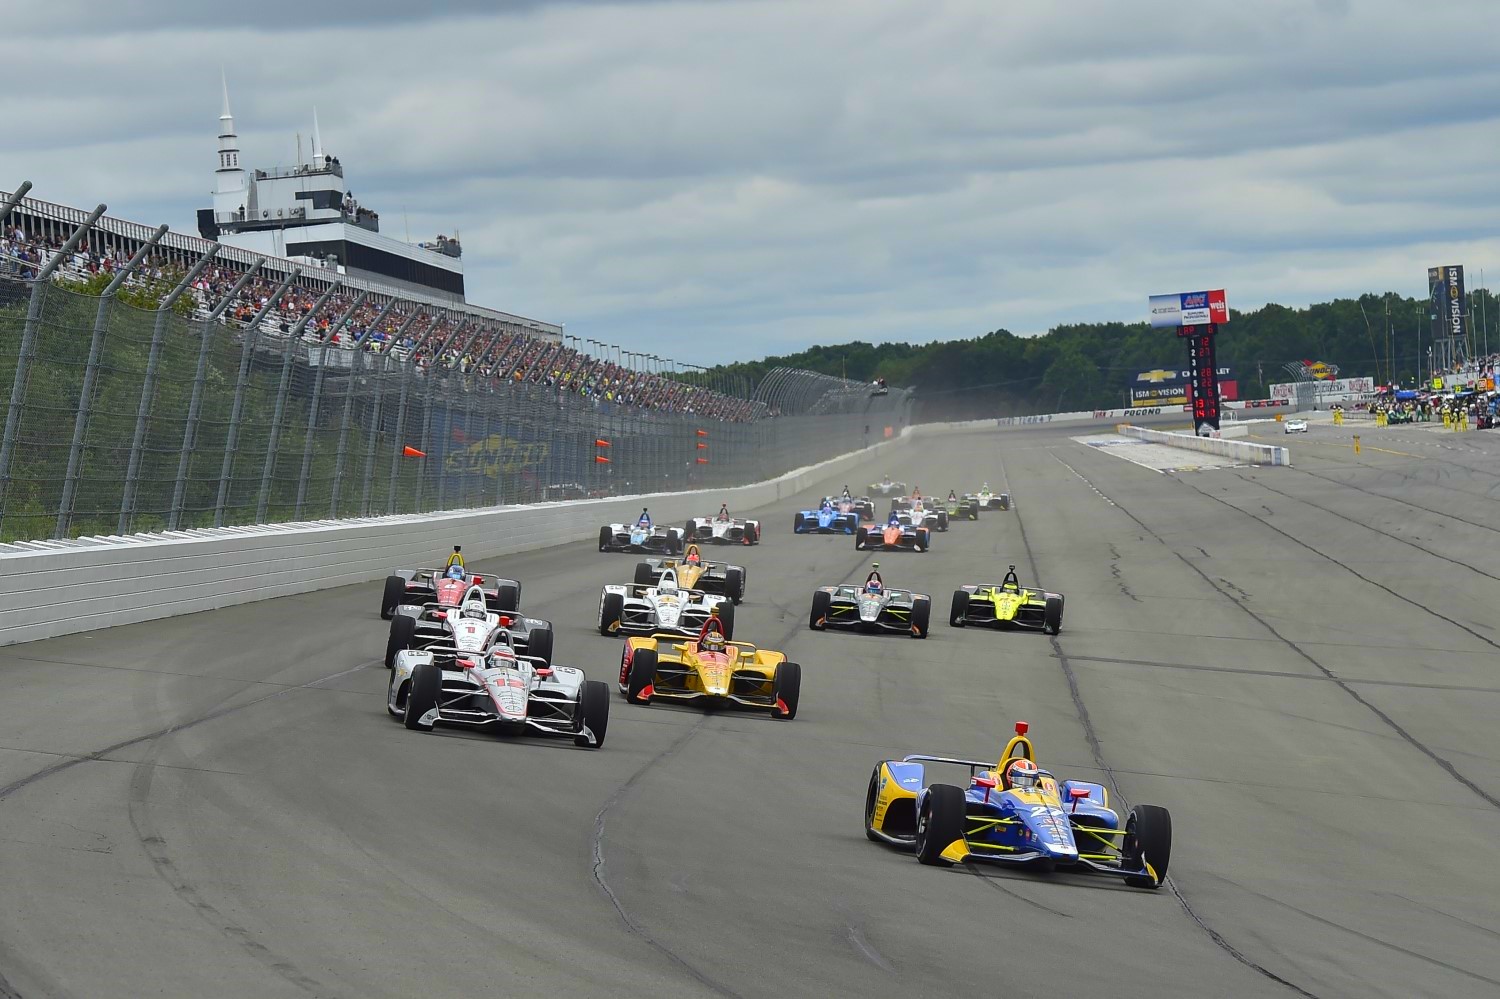 How much will the traction compound help or hurt the IndyCar race 3 weeks later